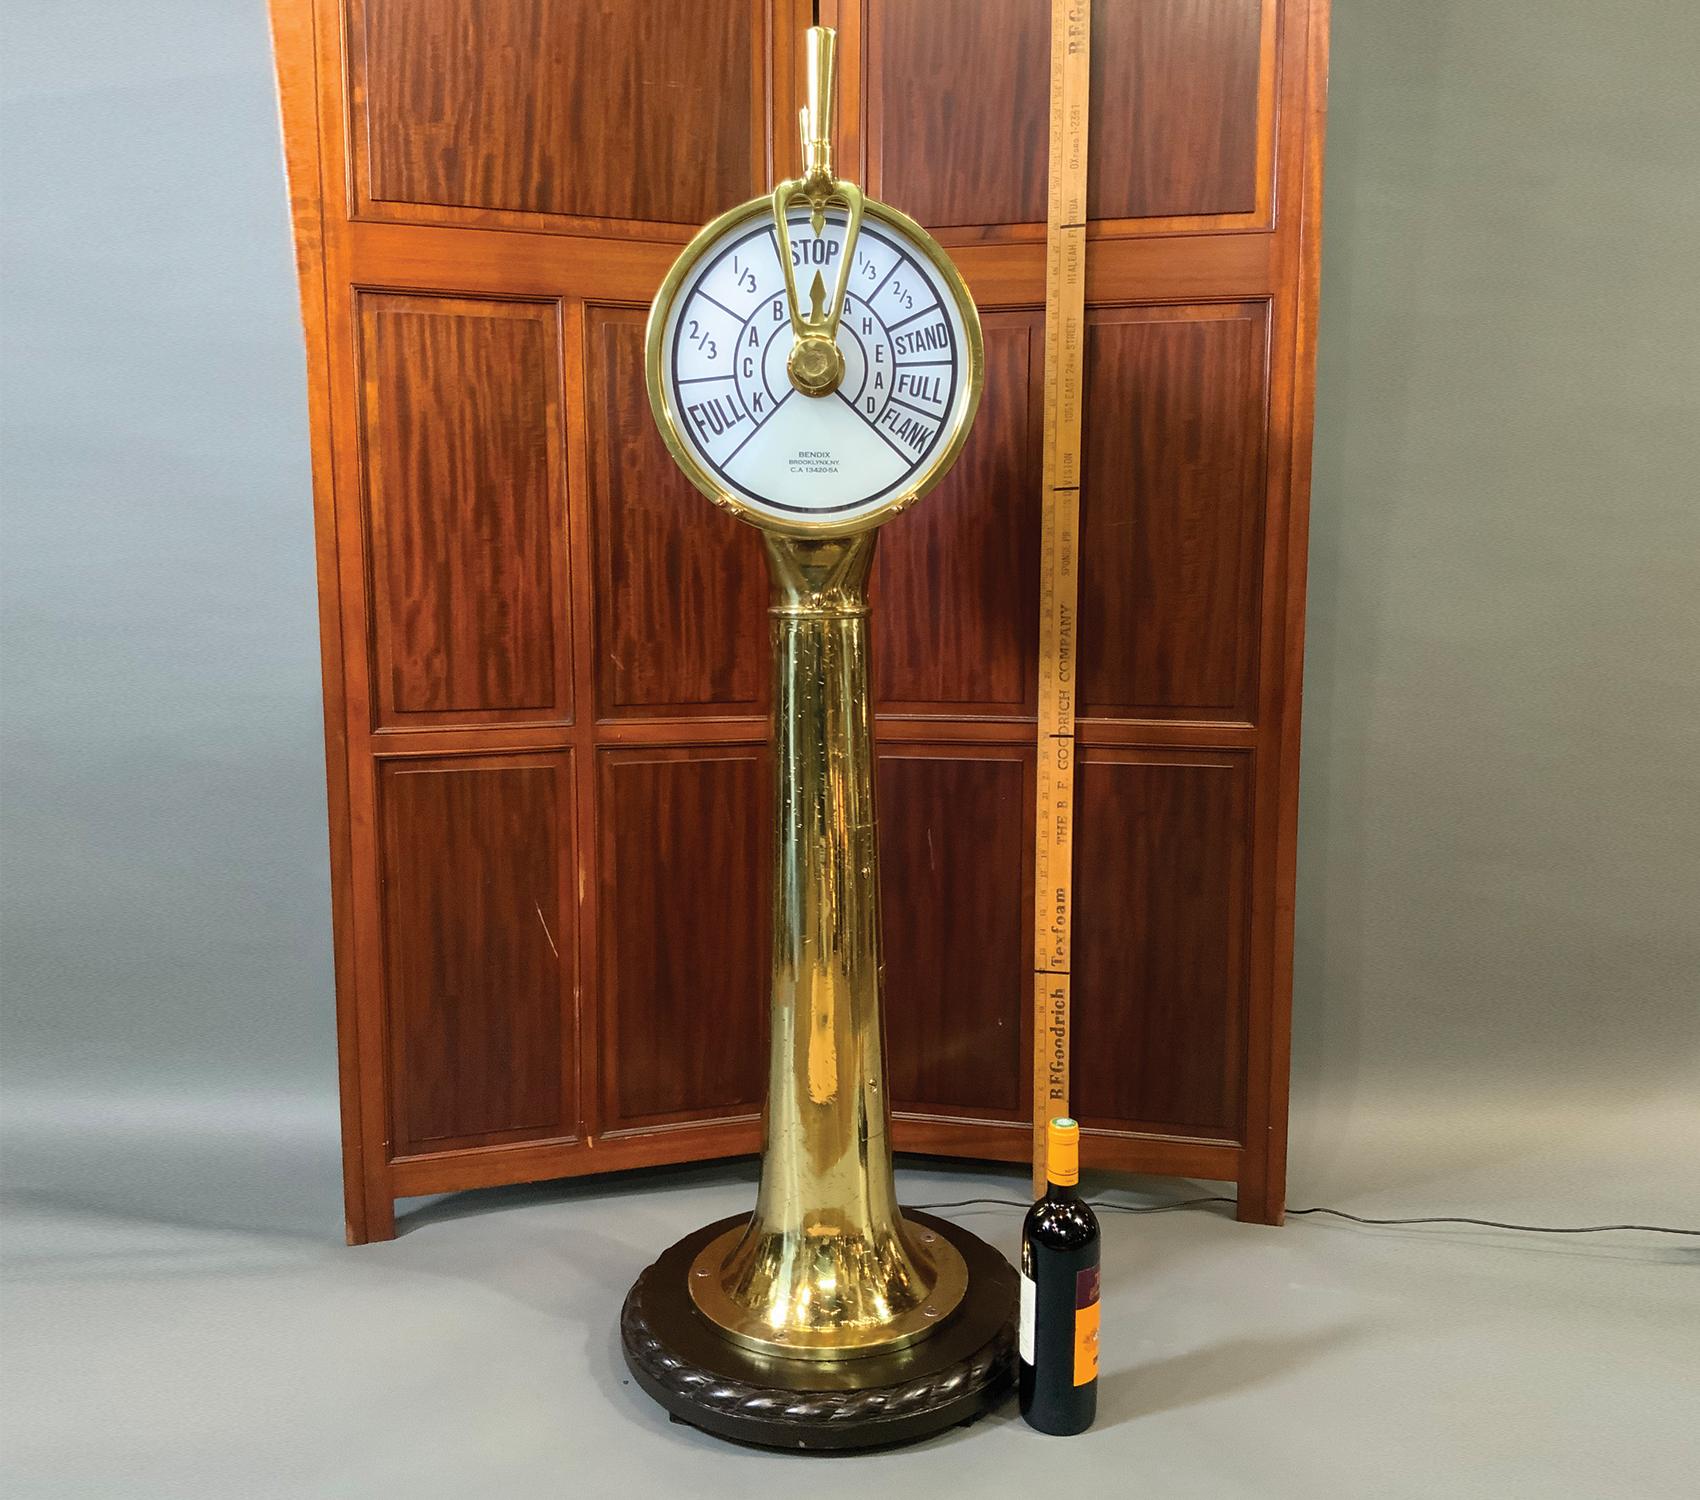 Solid brass ships engine order telegraph by American Maker Bendix. Twin face design with back and ahead commands. Fitted with 2 solid brass control handles. Copper tag on pedestal is engraved “Bendix Aviation Corporation- Marine Division, Brooklyn